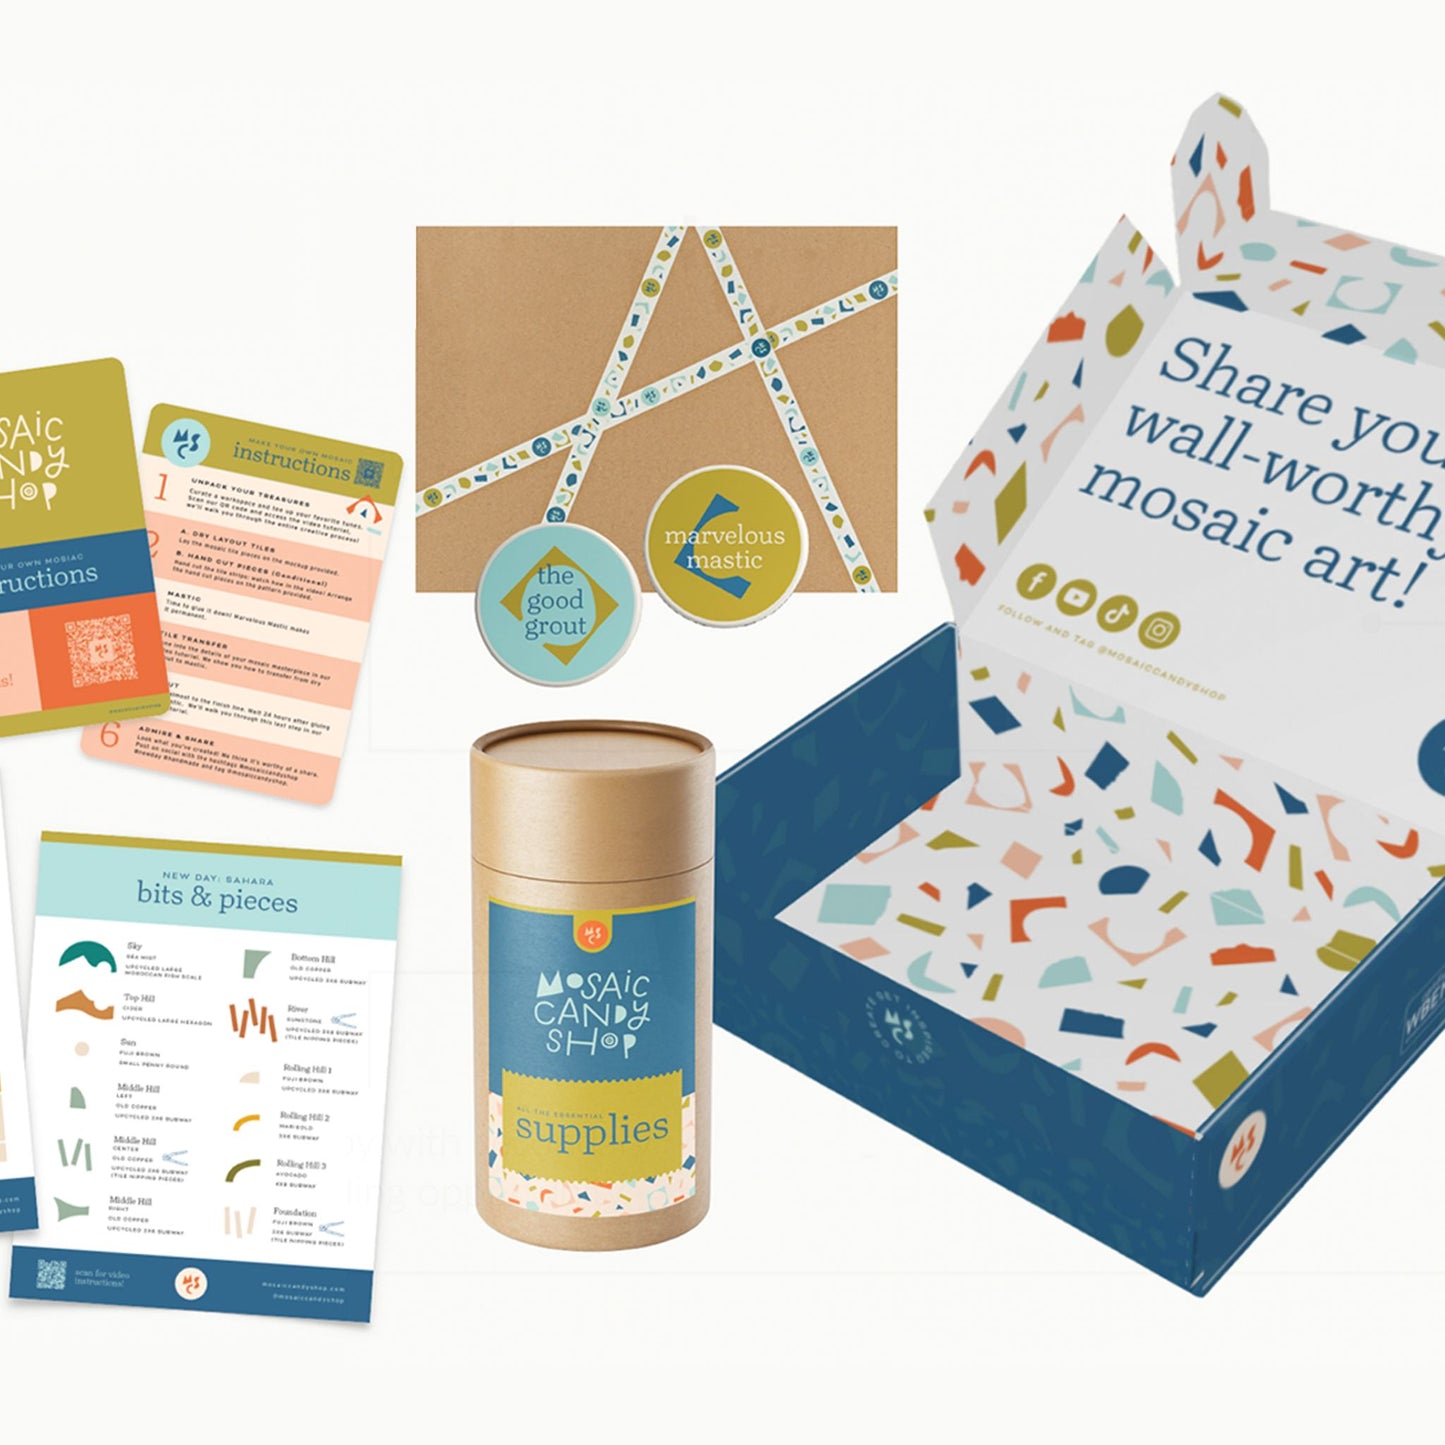 New Day Mosaic Kit packaging & kit contents list